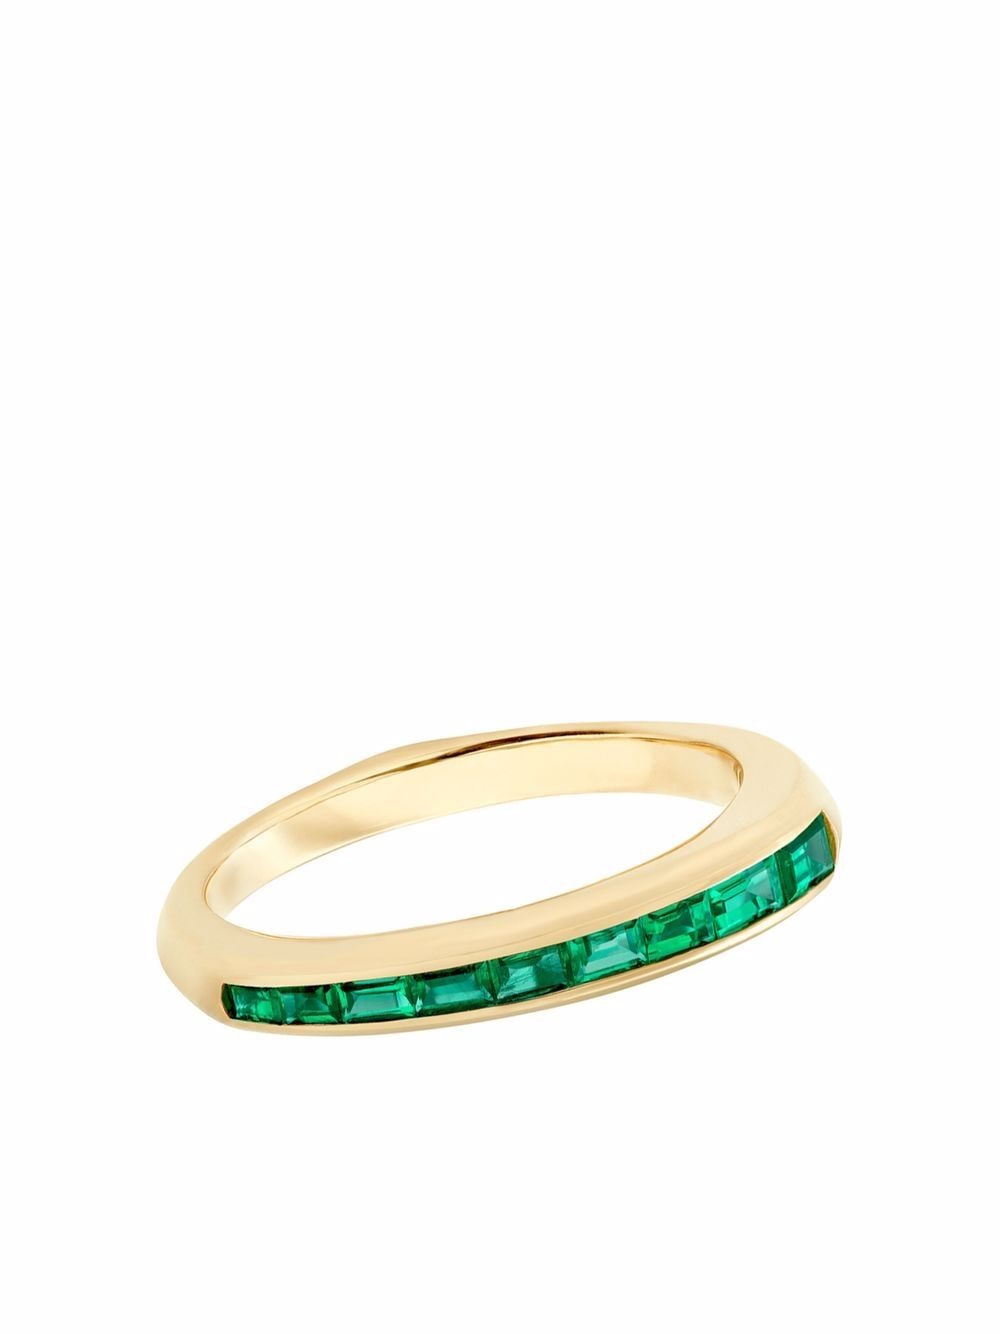 STEPHEN WEBSTER 18KT YELLOW GOLD CH2 BAGUETTE EMERALD STACK RING